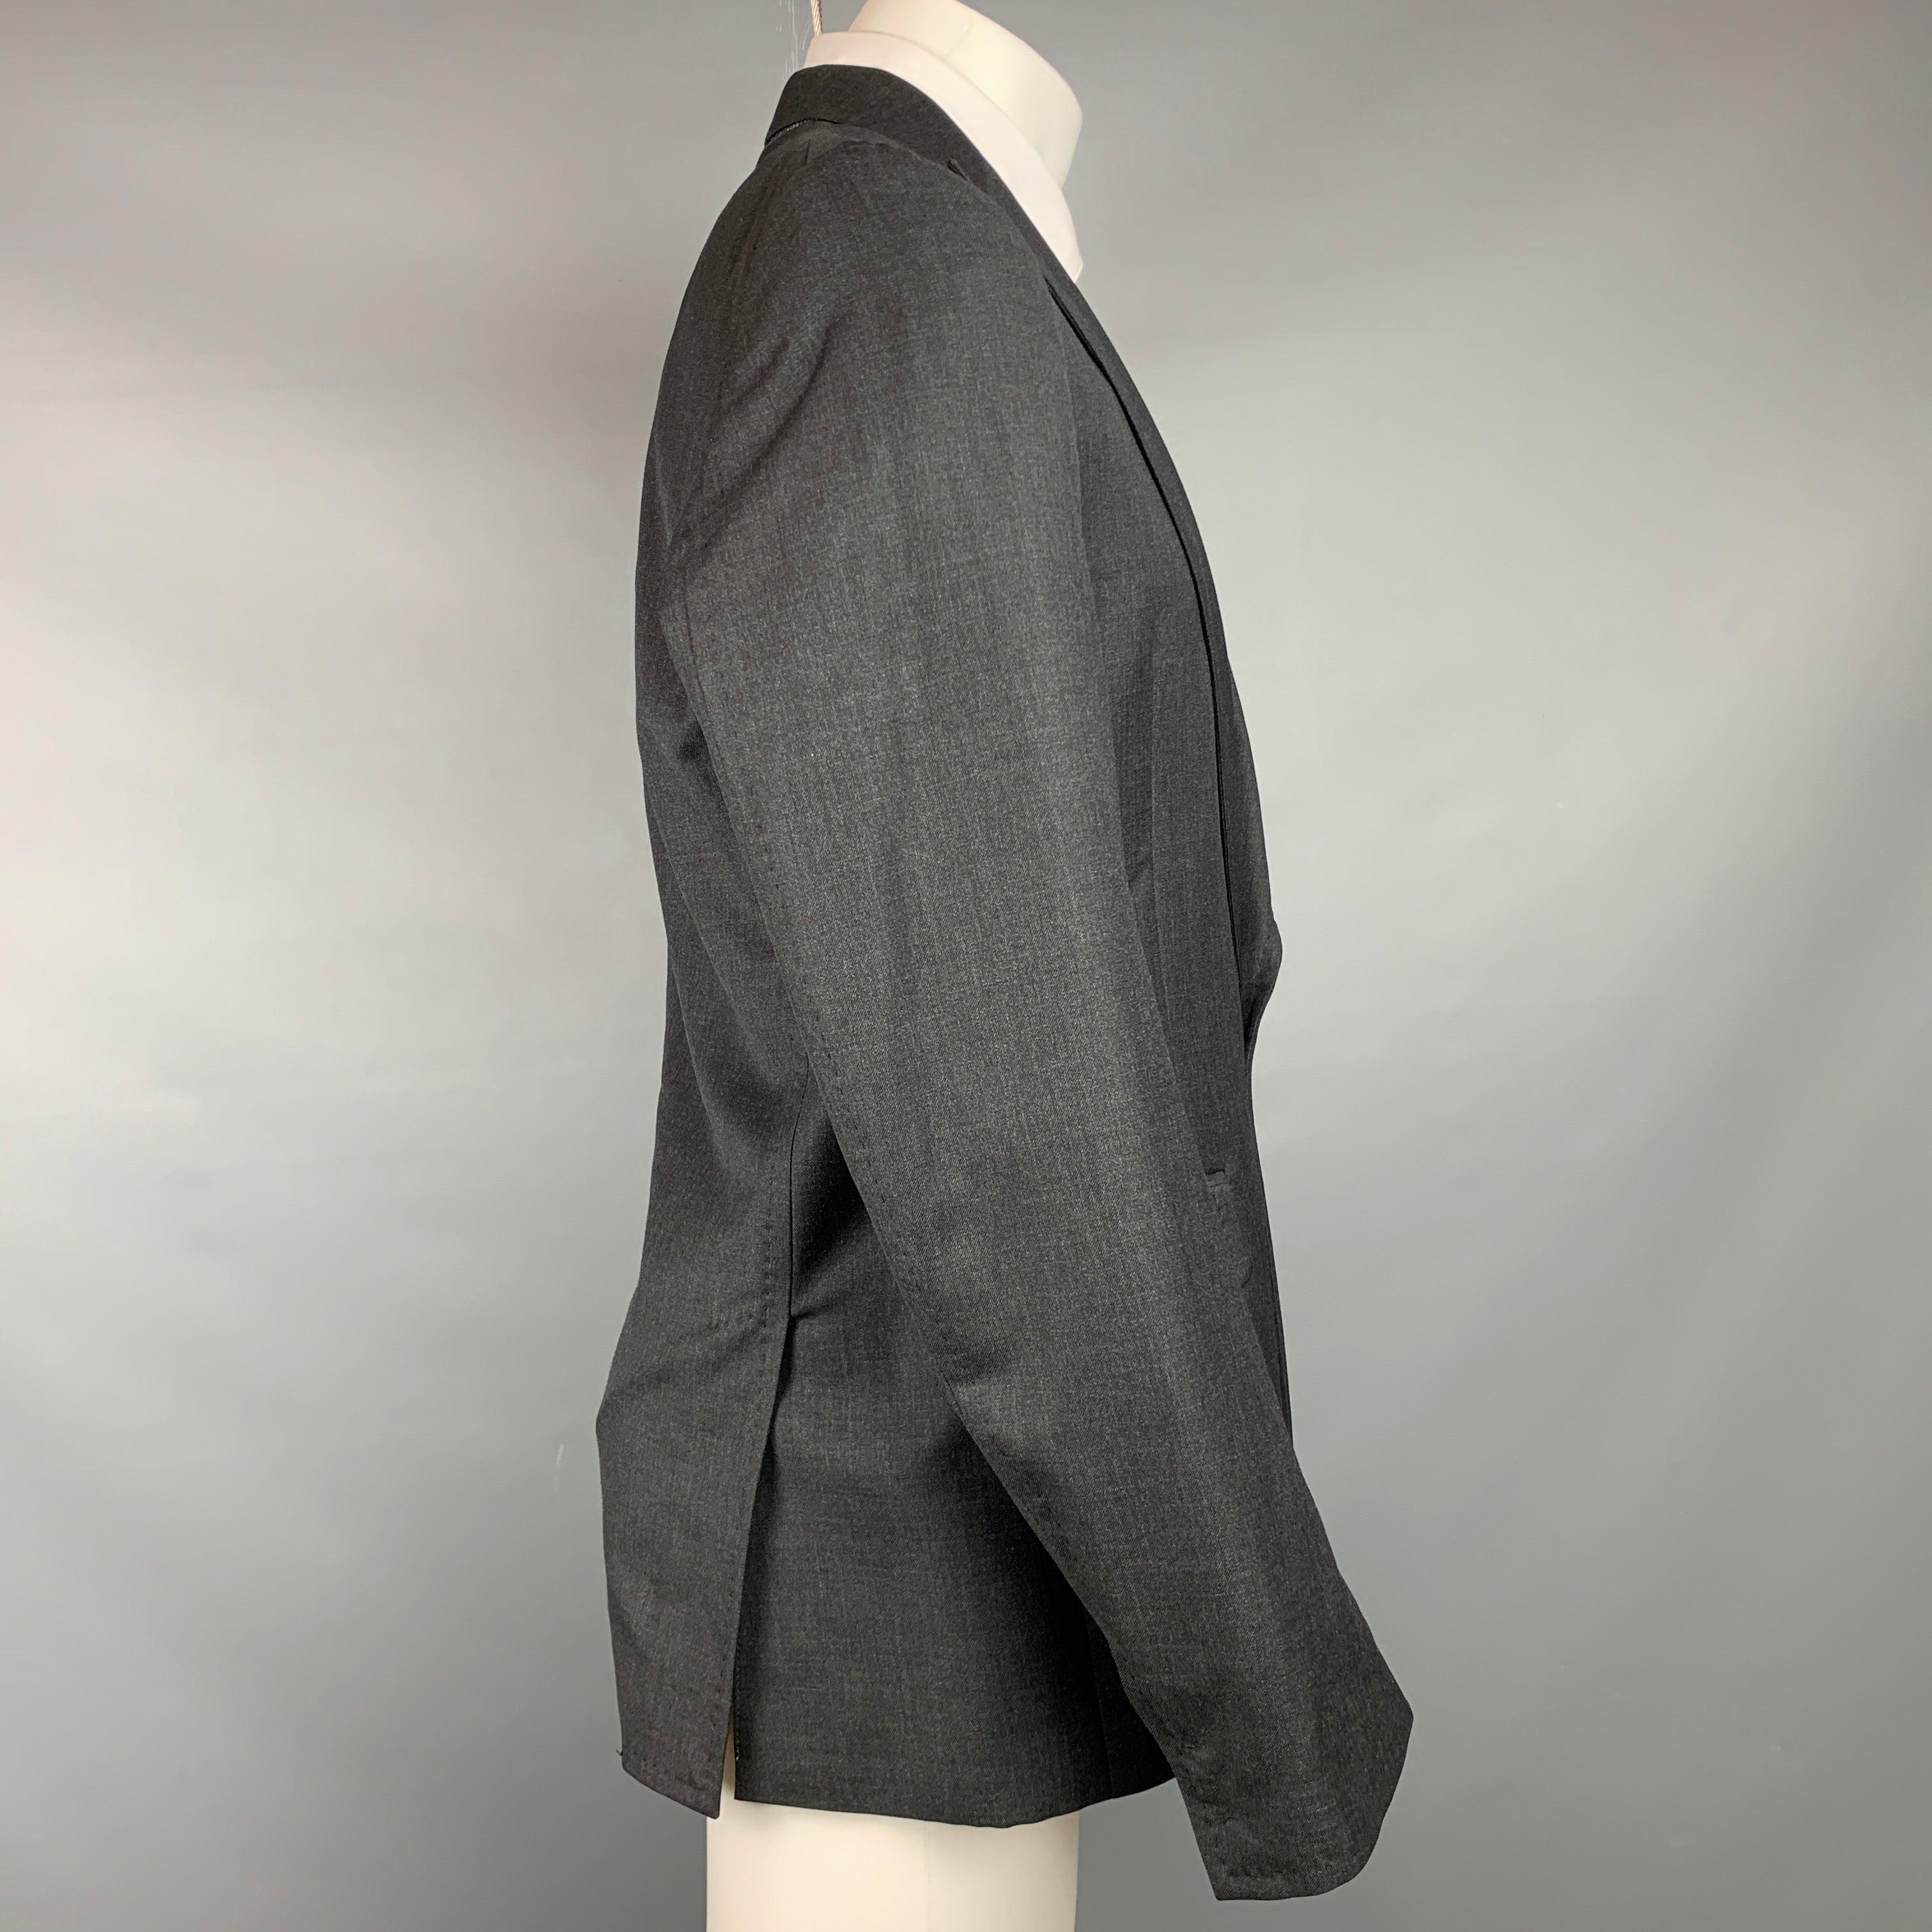 DSQUARED2 Size 40 Charcoal Wool Peak Lapel Sport Coat In Good Condition For Sale In San Francisco, CA